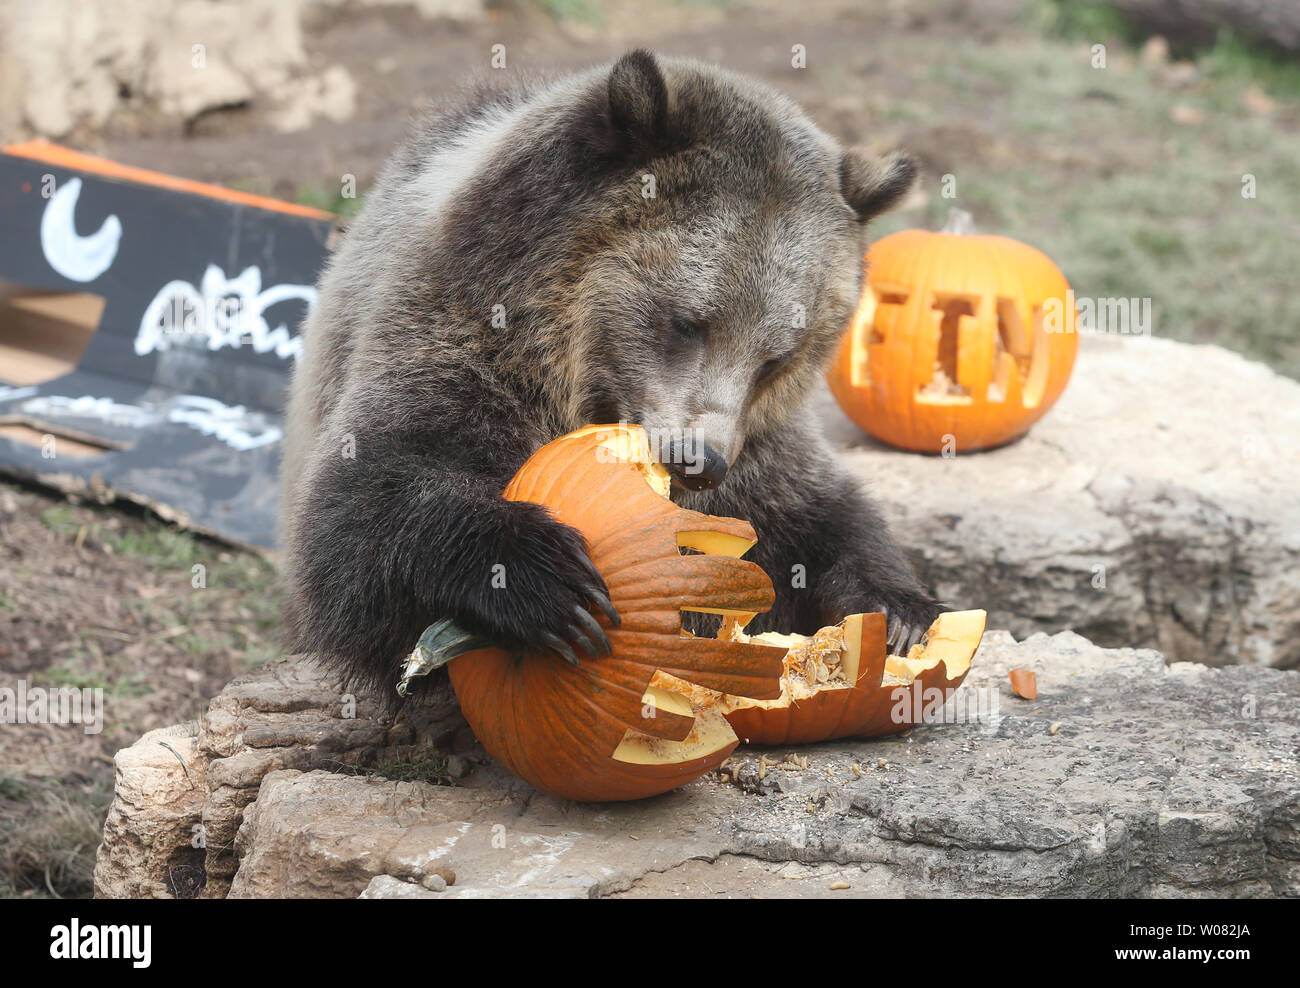 Finley the grizzly bear tears into a pumpkin filled with treats as she and other bears prepare for Halloween at the Saint Louis Zoo in St. Louis on October 31, 2017. The Zoo’s staff provides enrichment, such as Halloween pumpkin activities, to give the animals interesting and stimulating ways to engage in natural behaviors. Photo by Bill Greenblatt/UPI Stock Photo